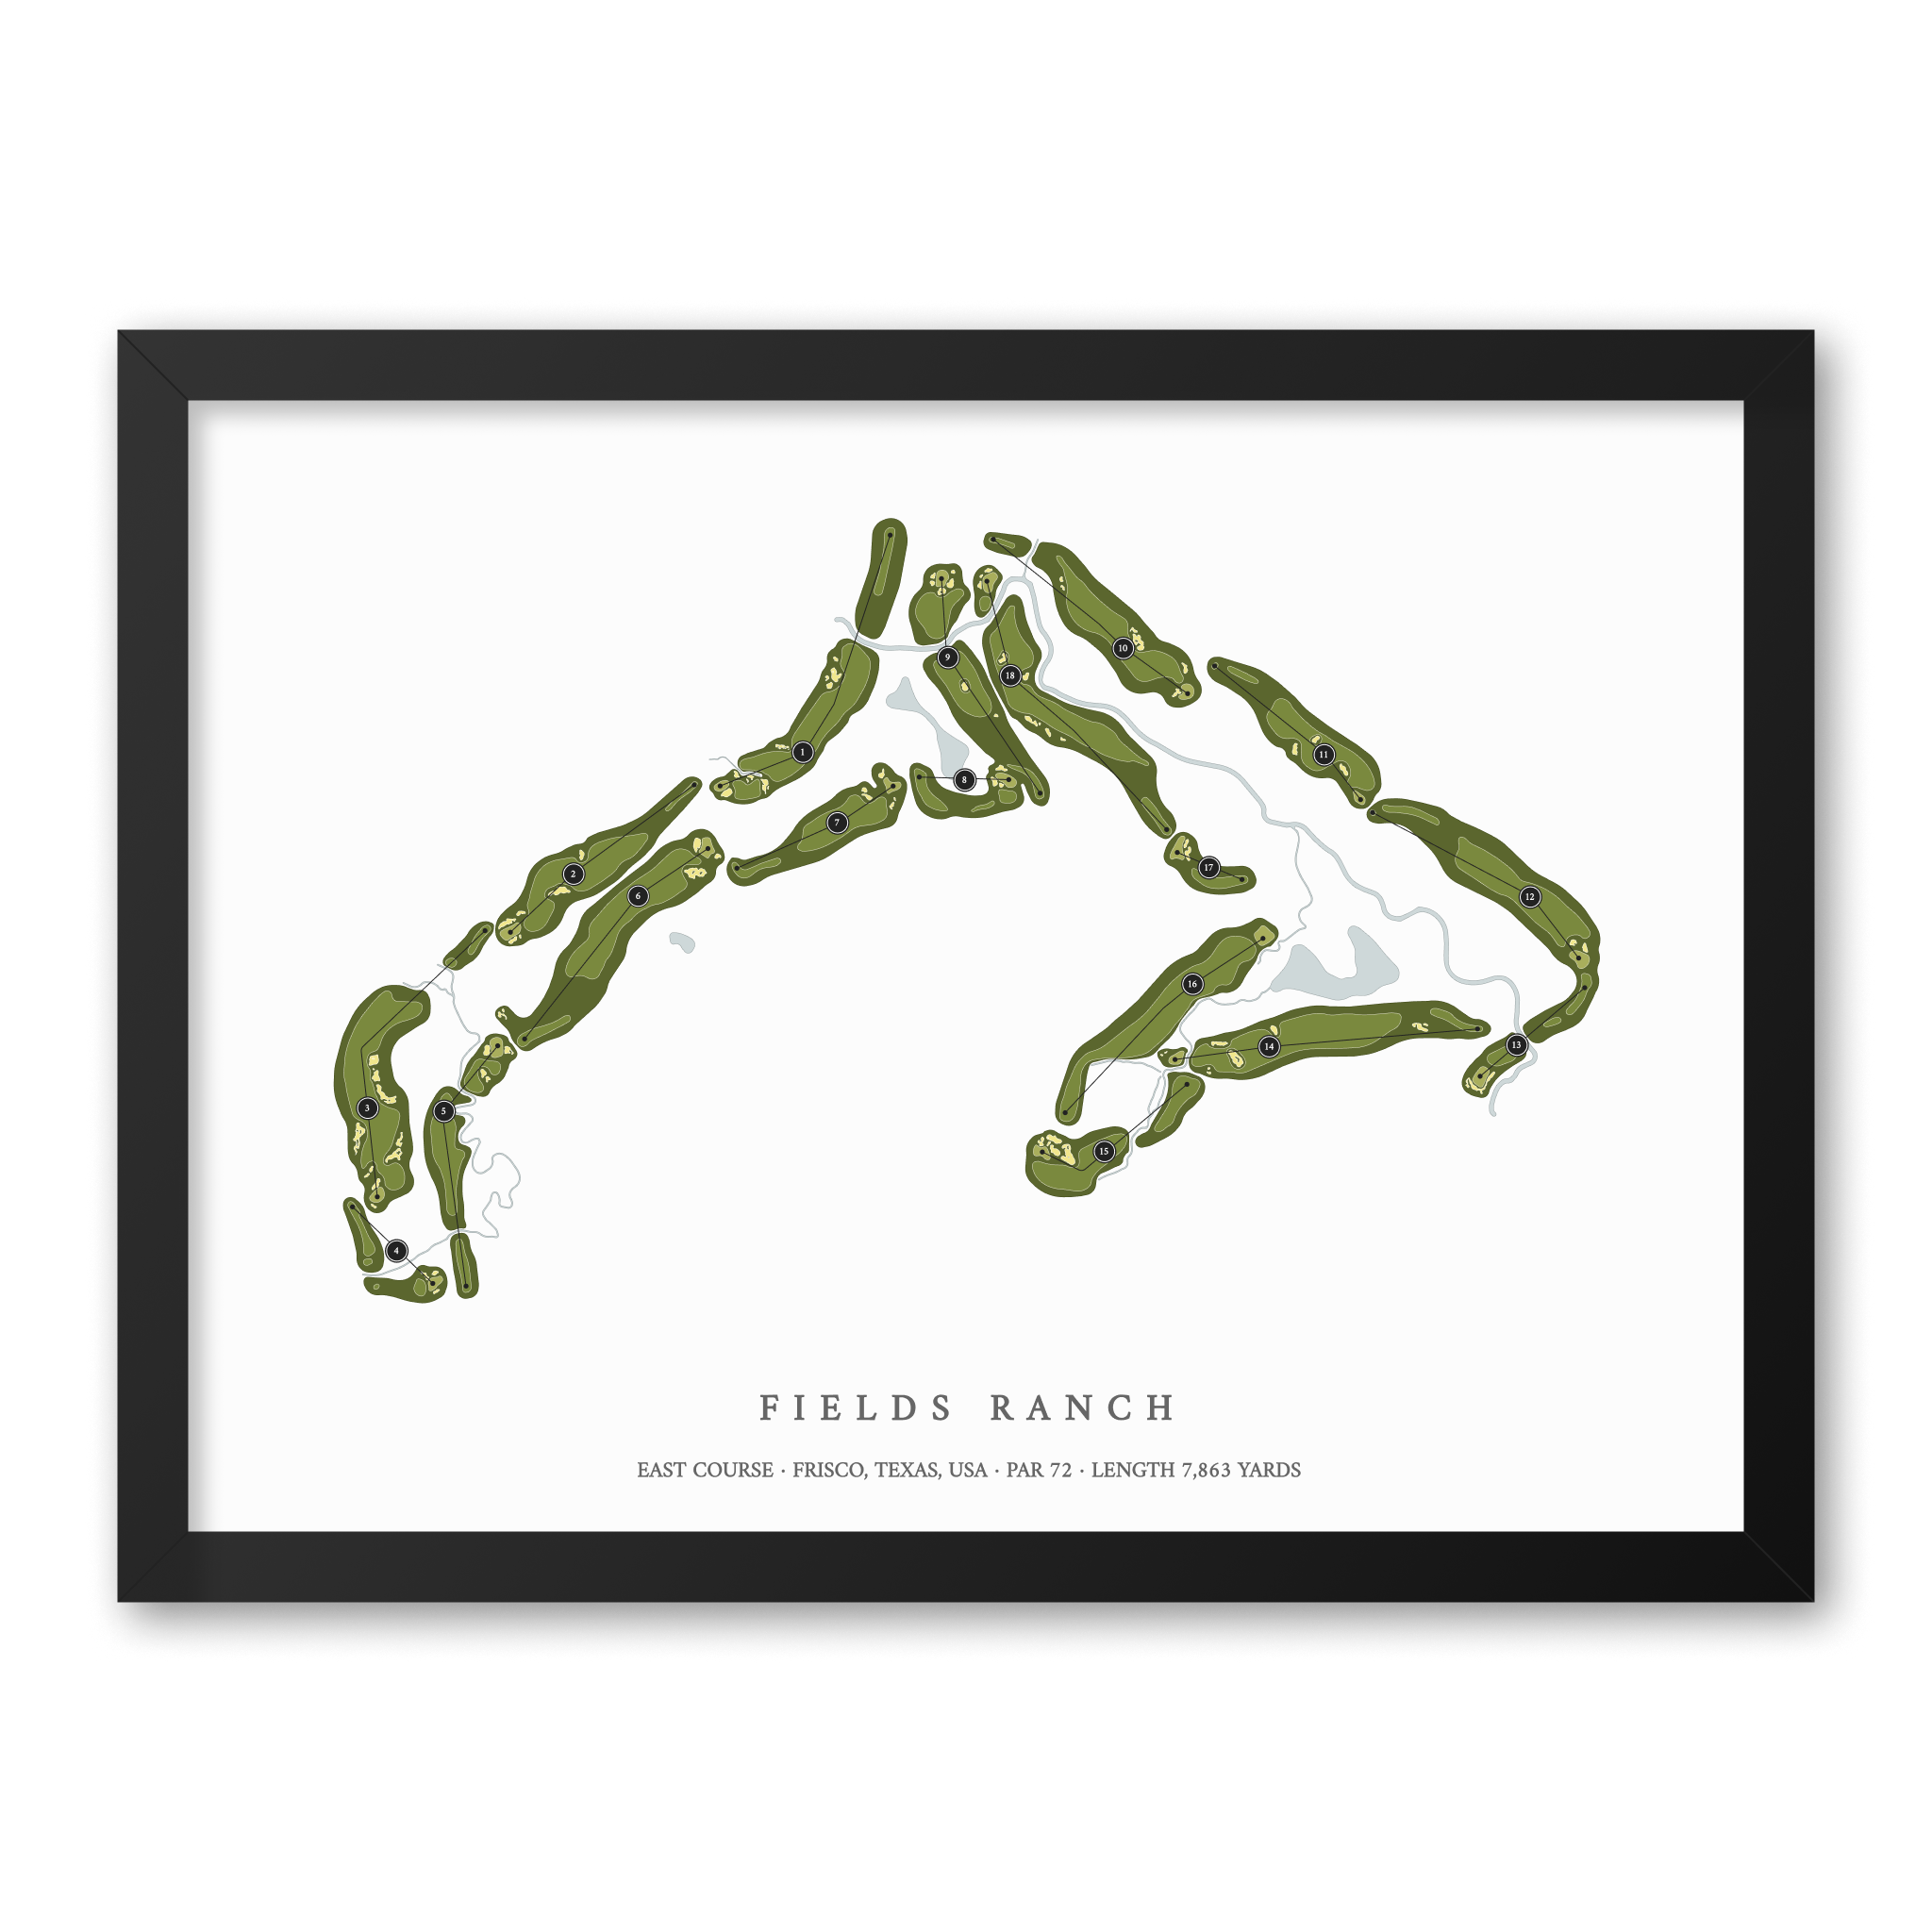 Fields Ranch - East Course | Golf Course Map | Black Frame